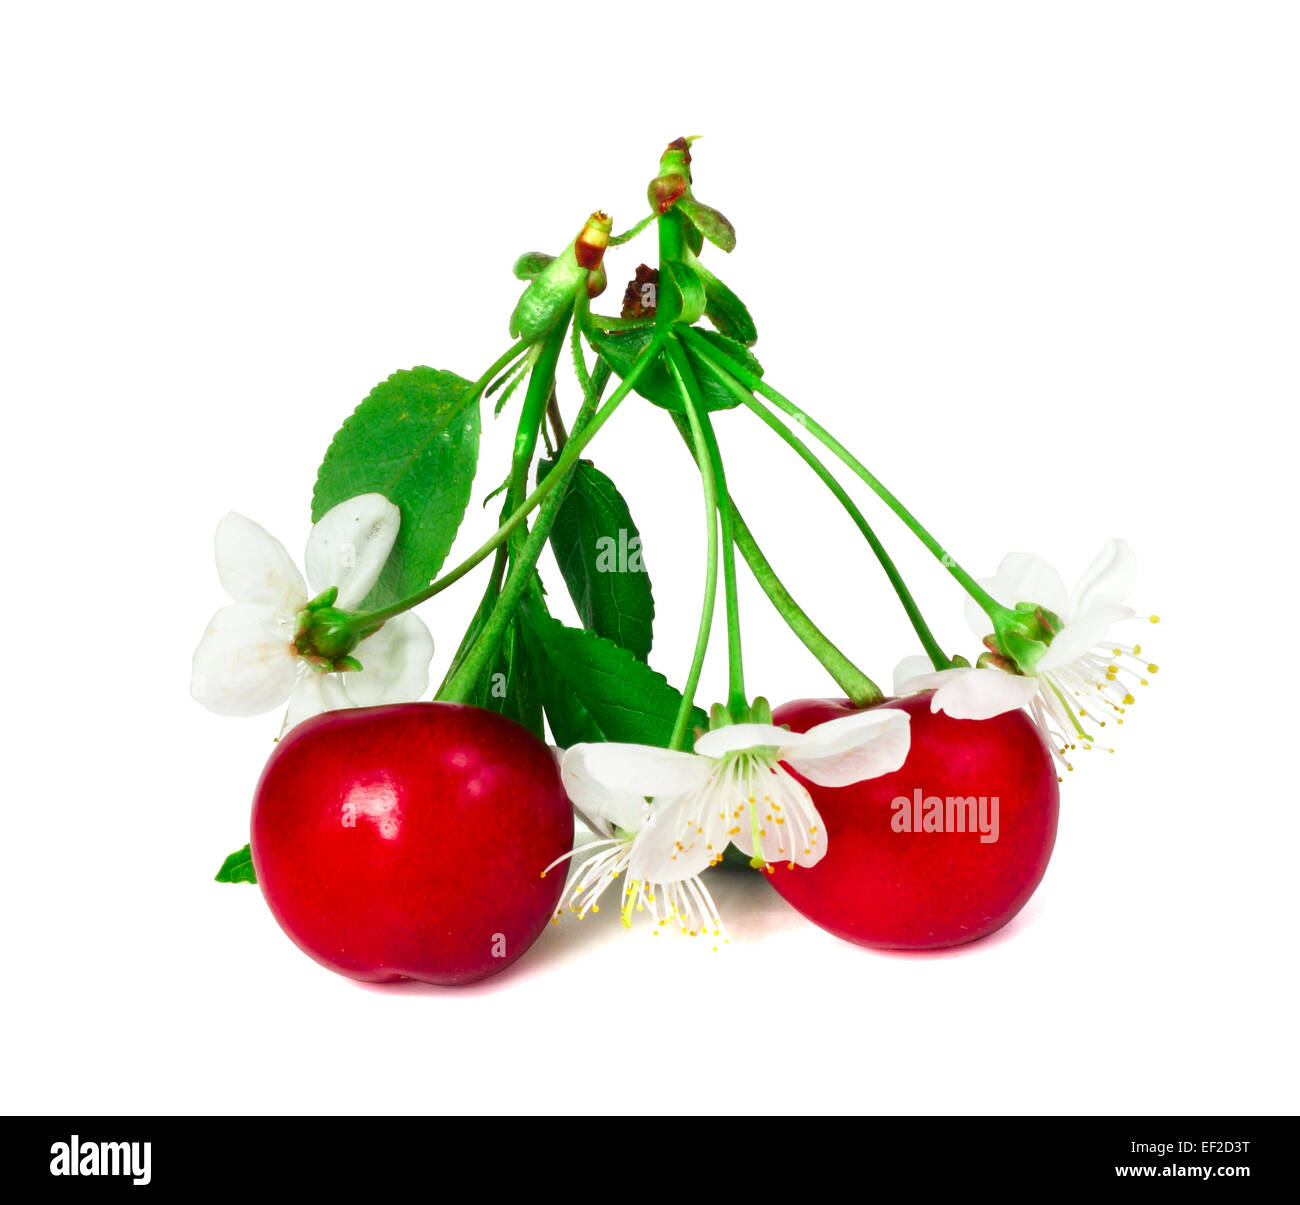 Cherry with leafs and flowers isolated on white background Stock Photo